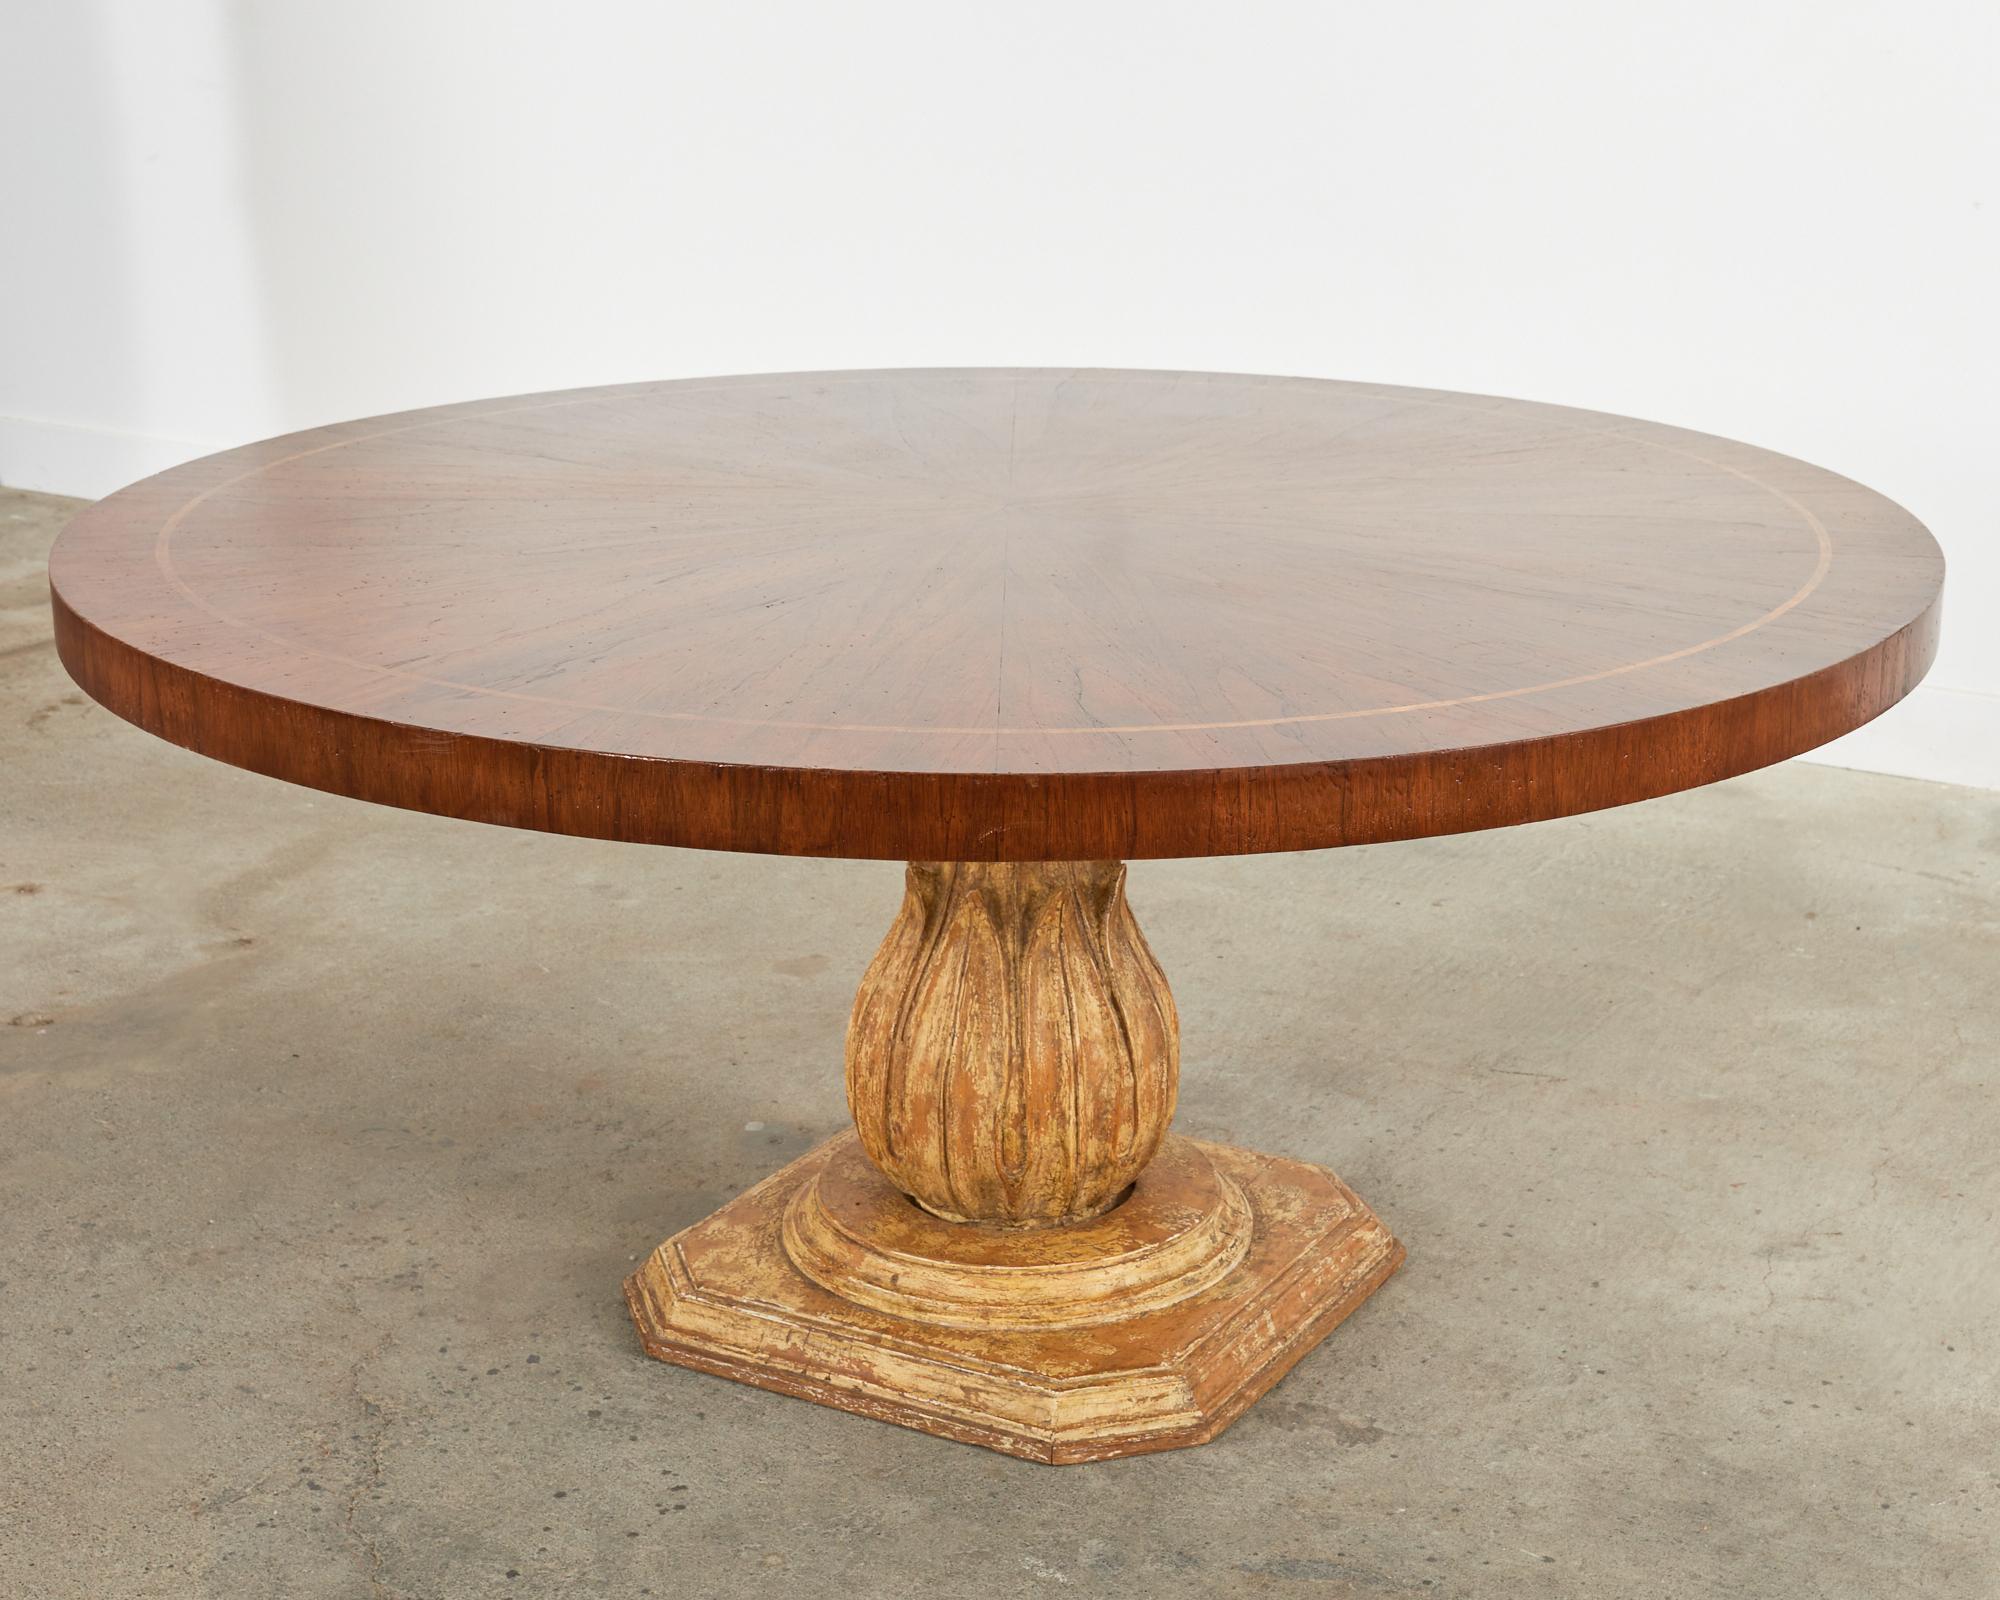 Painted Grand Italian Neoclassical Style Round Tulip Dining or Center Table For Sale